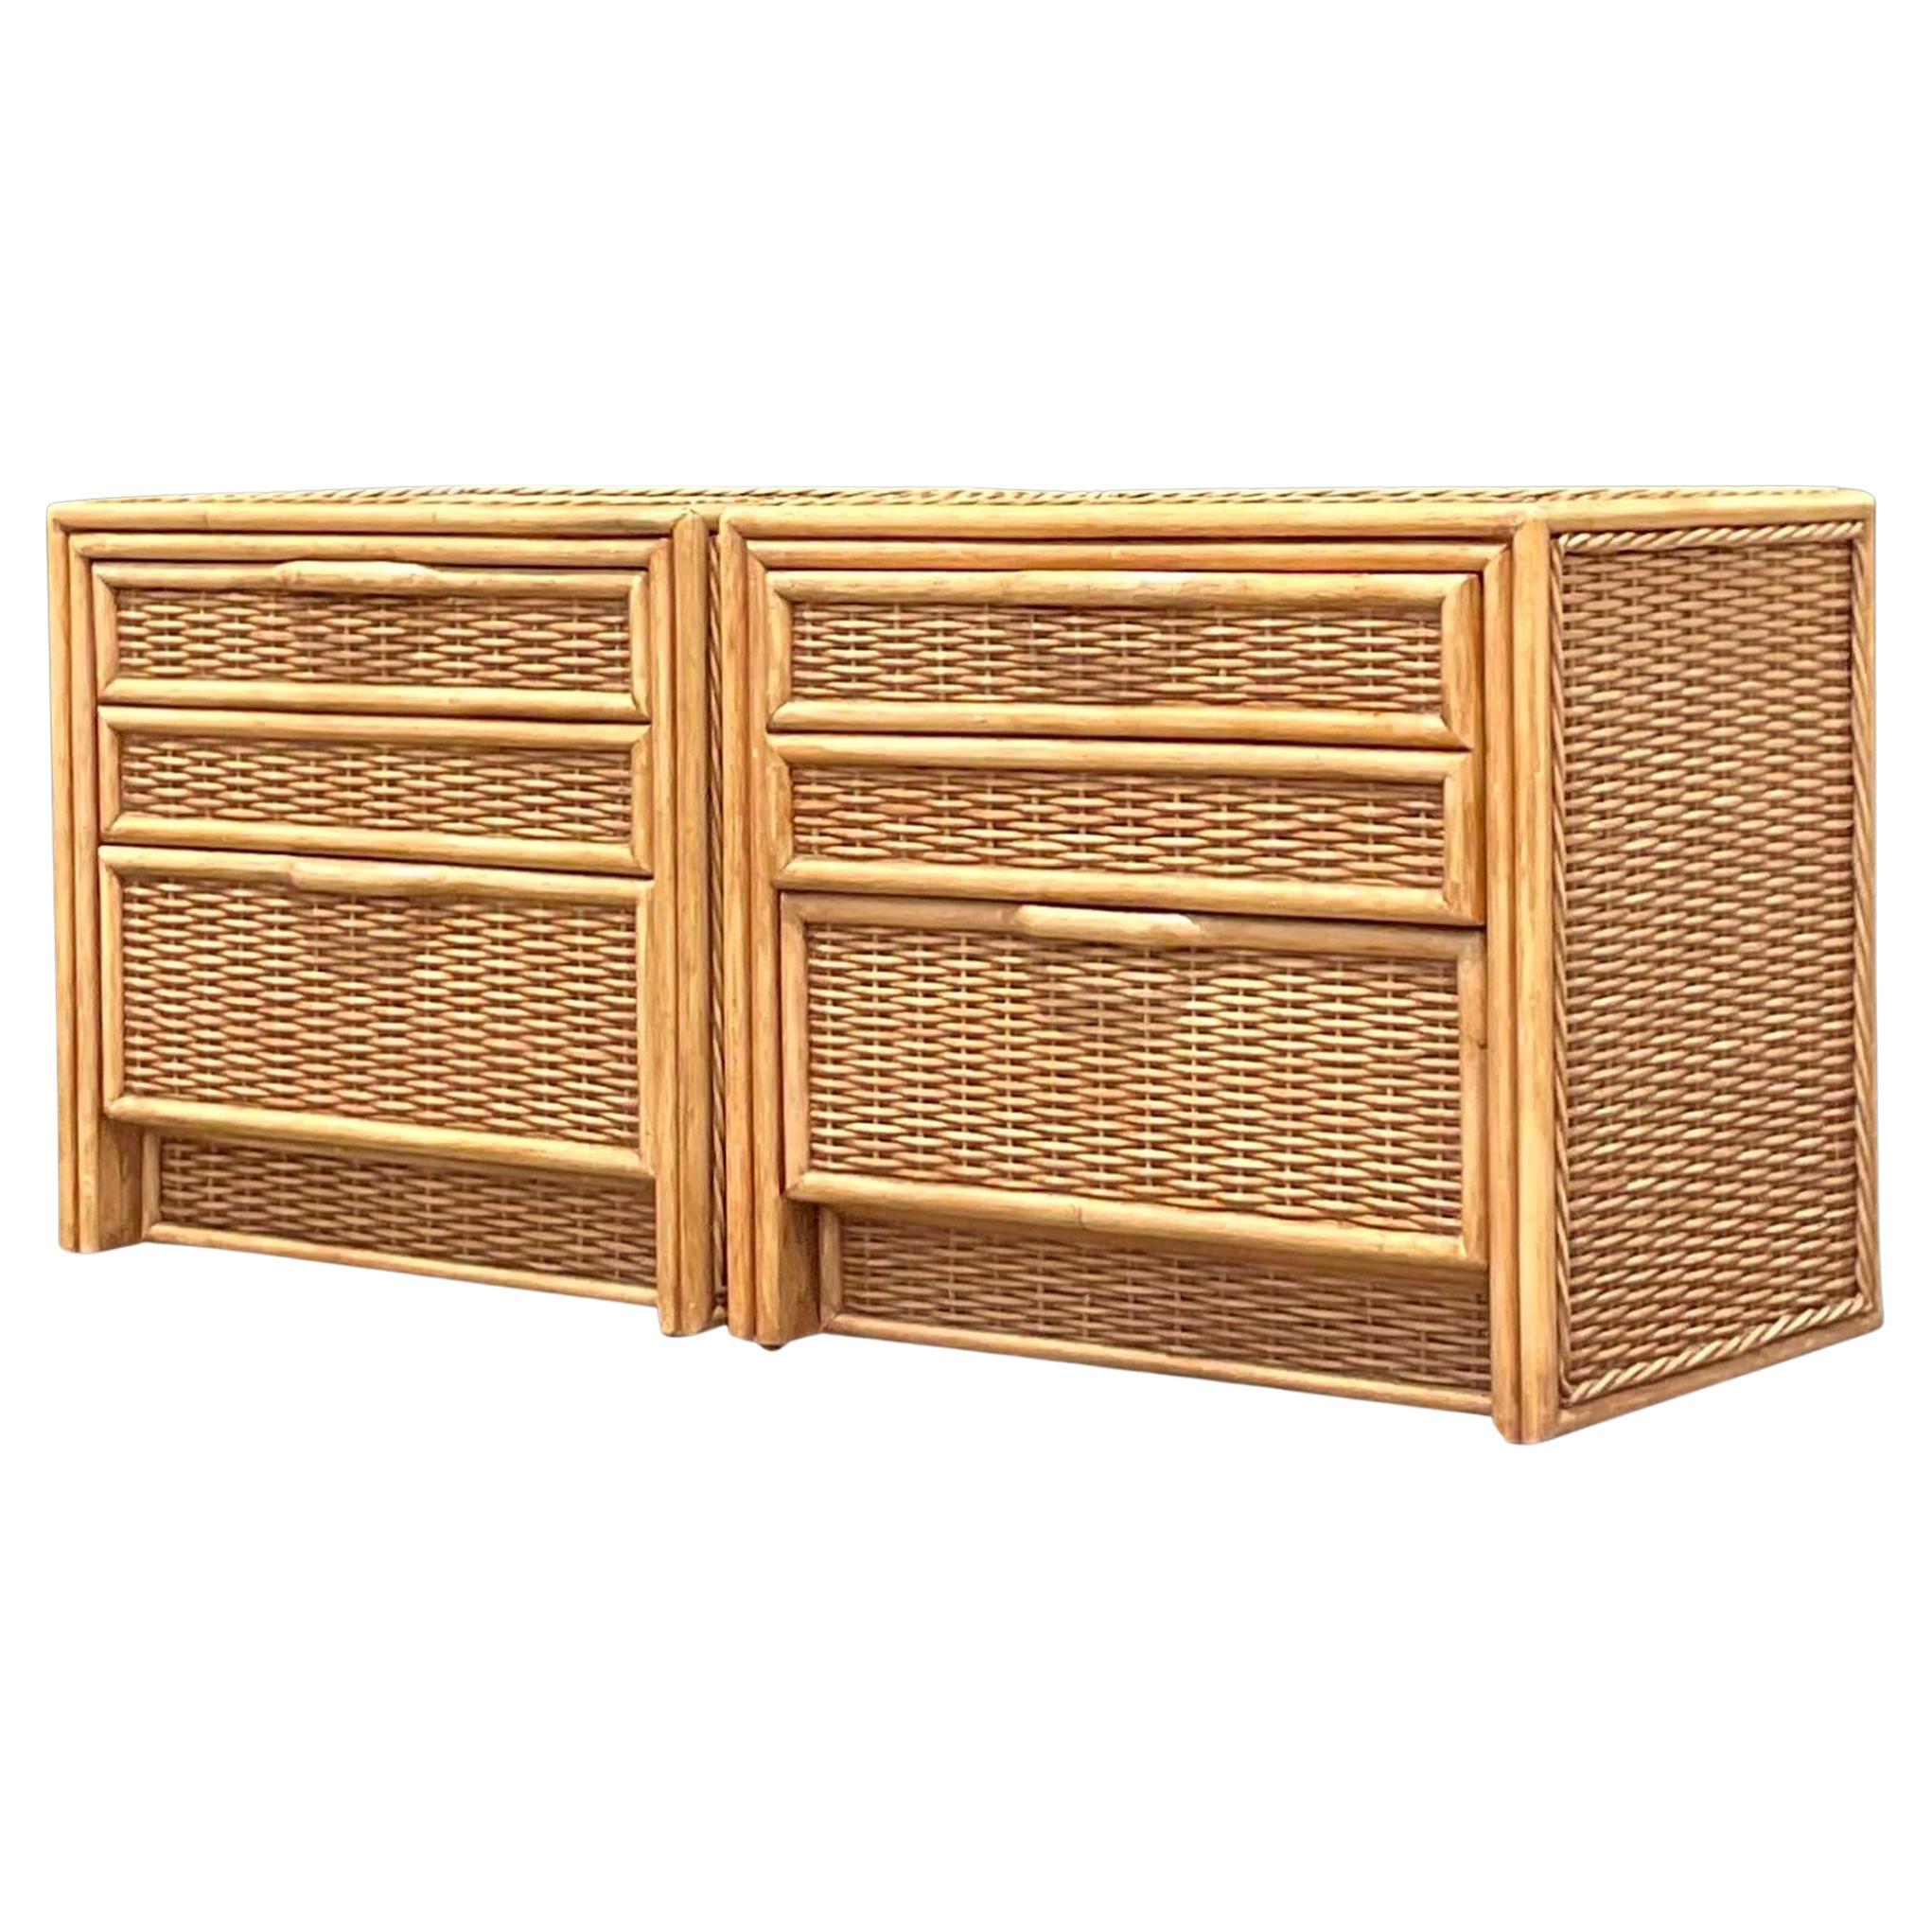 Late 20th Century Vintage Coastal Woven Rattan Nightstands - a Pair